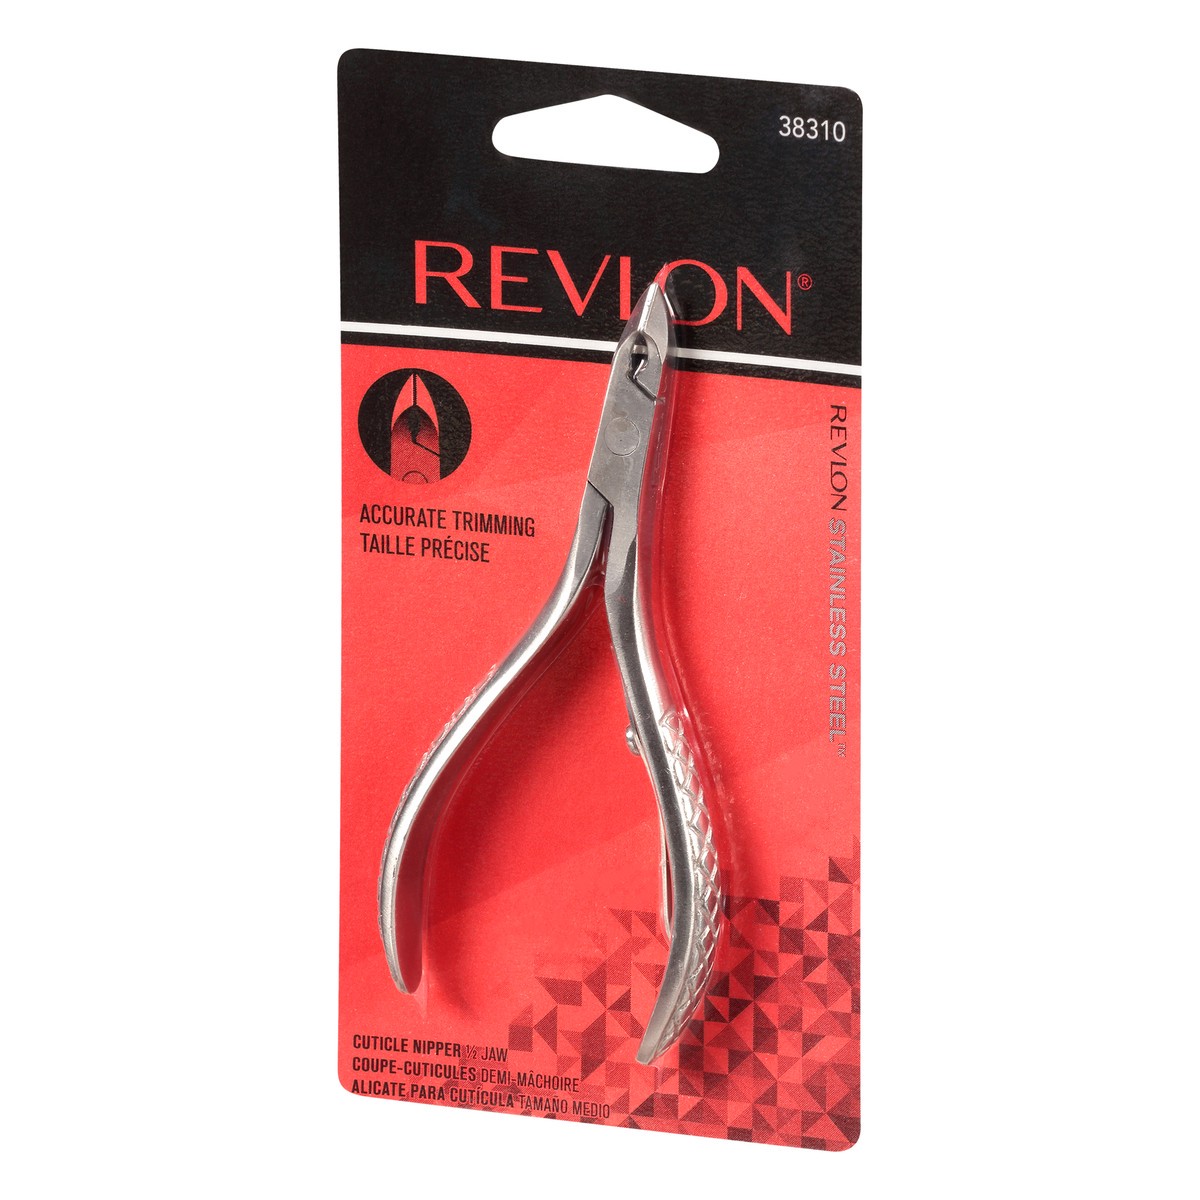 slide 3 of 9, Revlon Accurate Trimming 1/2 Jaw Cuticle Nipper 1 ea, 1 ct